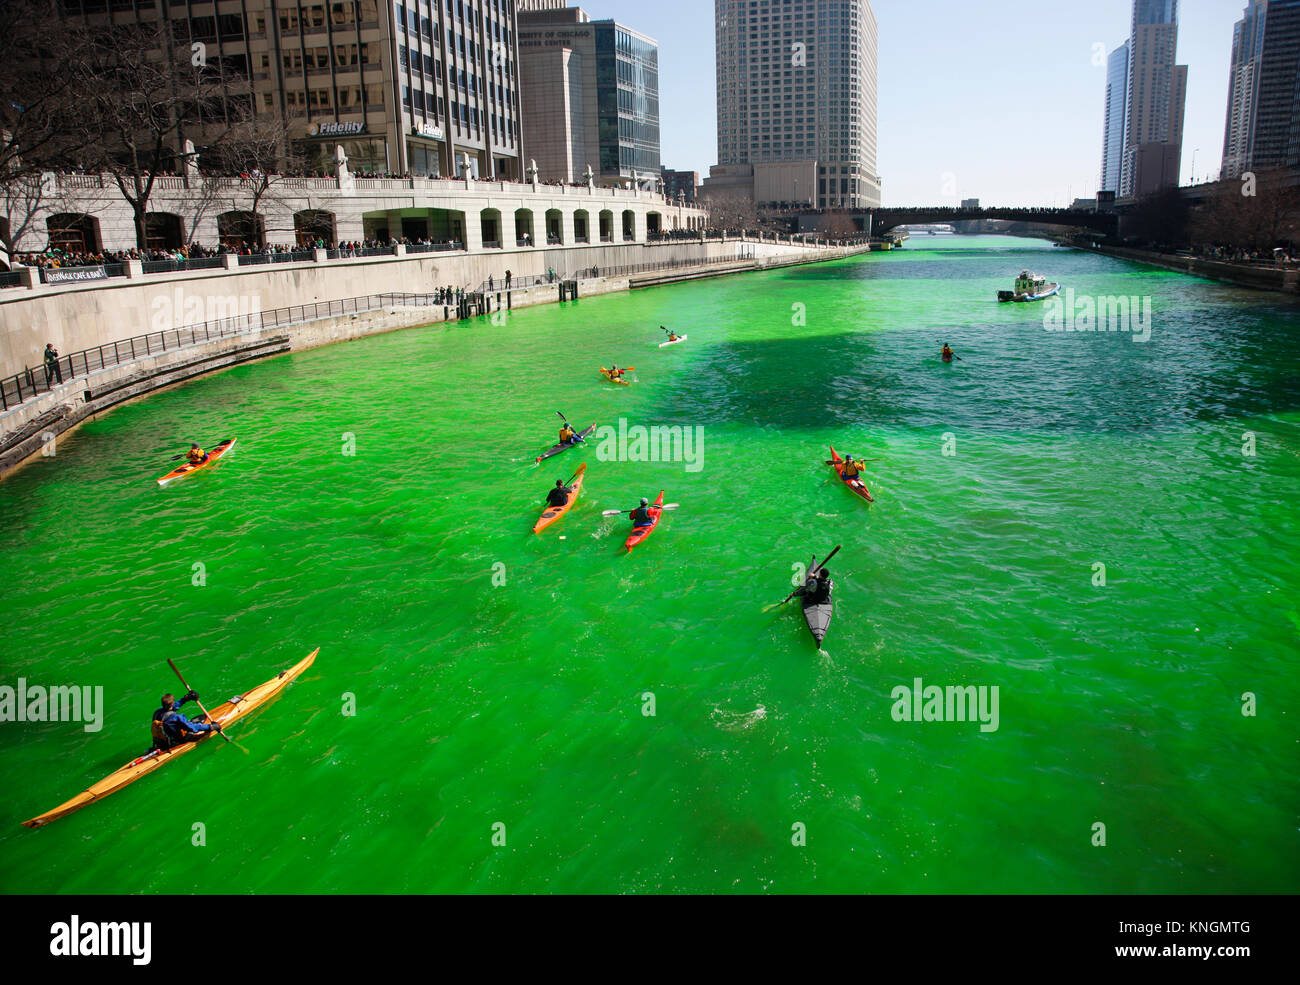 Kayaks on the Chicago River Green, Saint Patrick's Day. Stock Photo